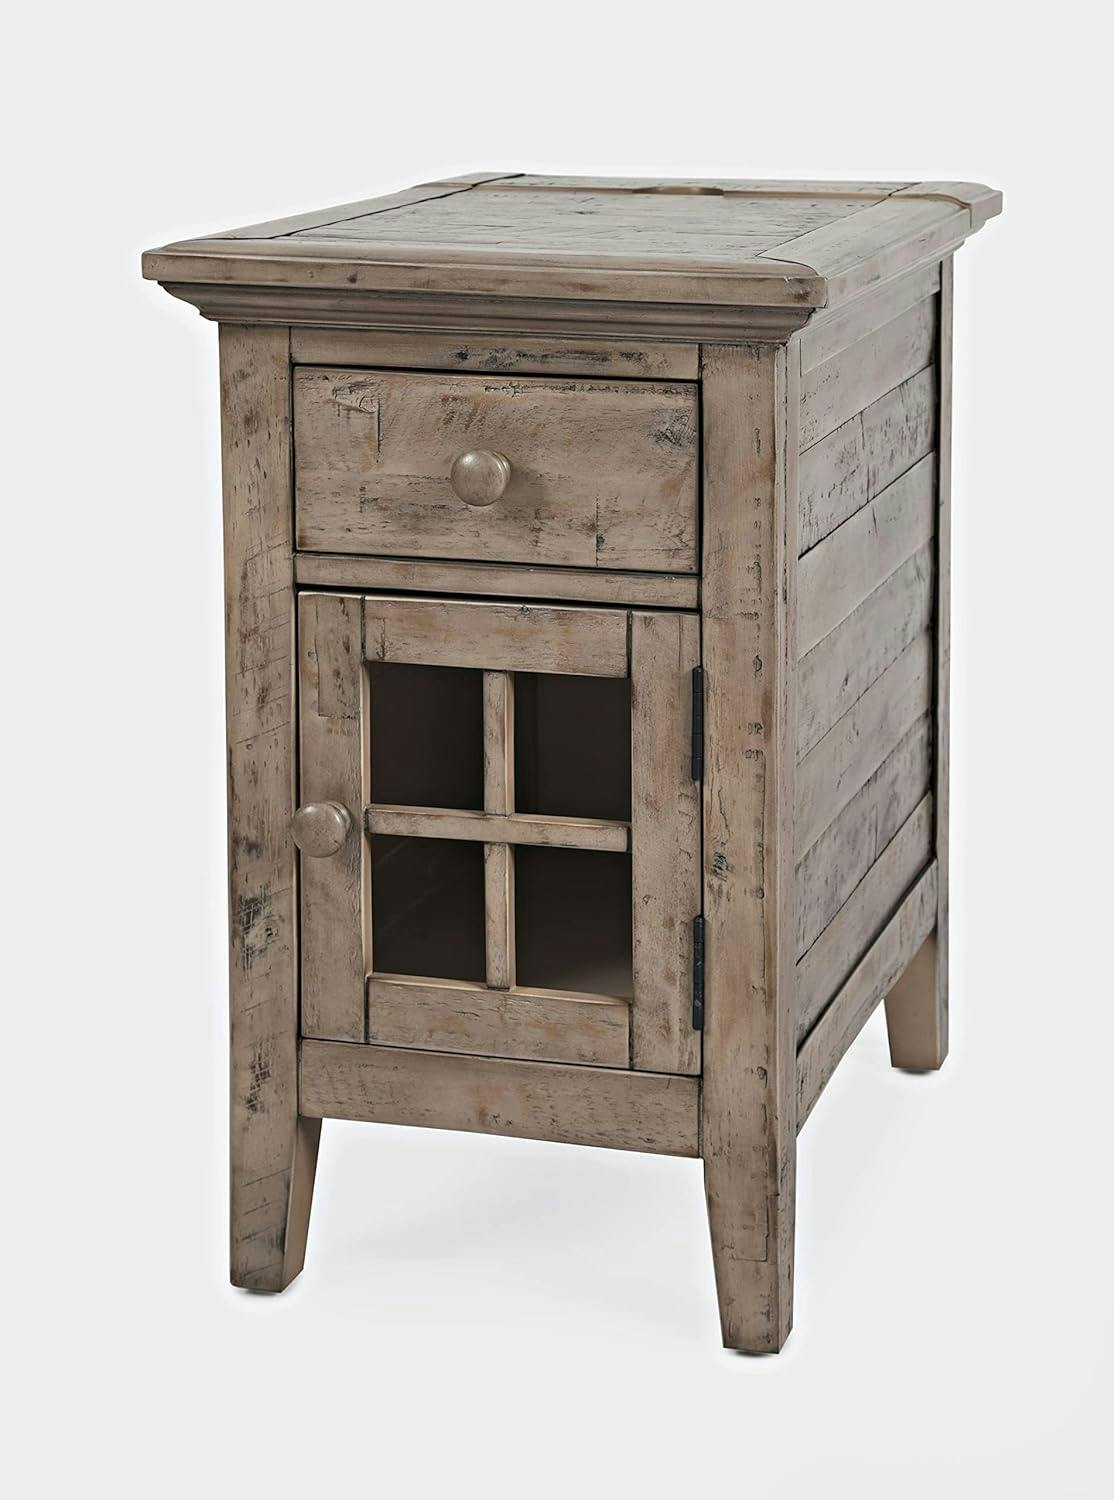 Rustic Shores Weathered Grey Rectangular Chairside Table with USB Ports